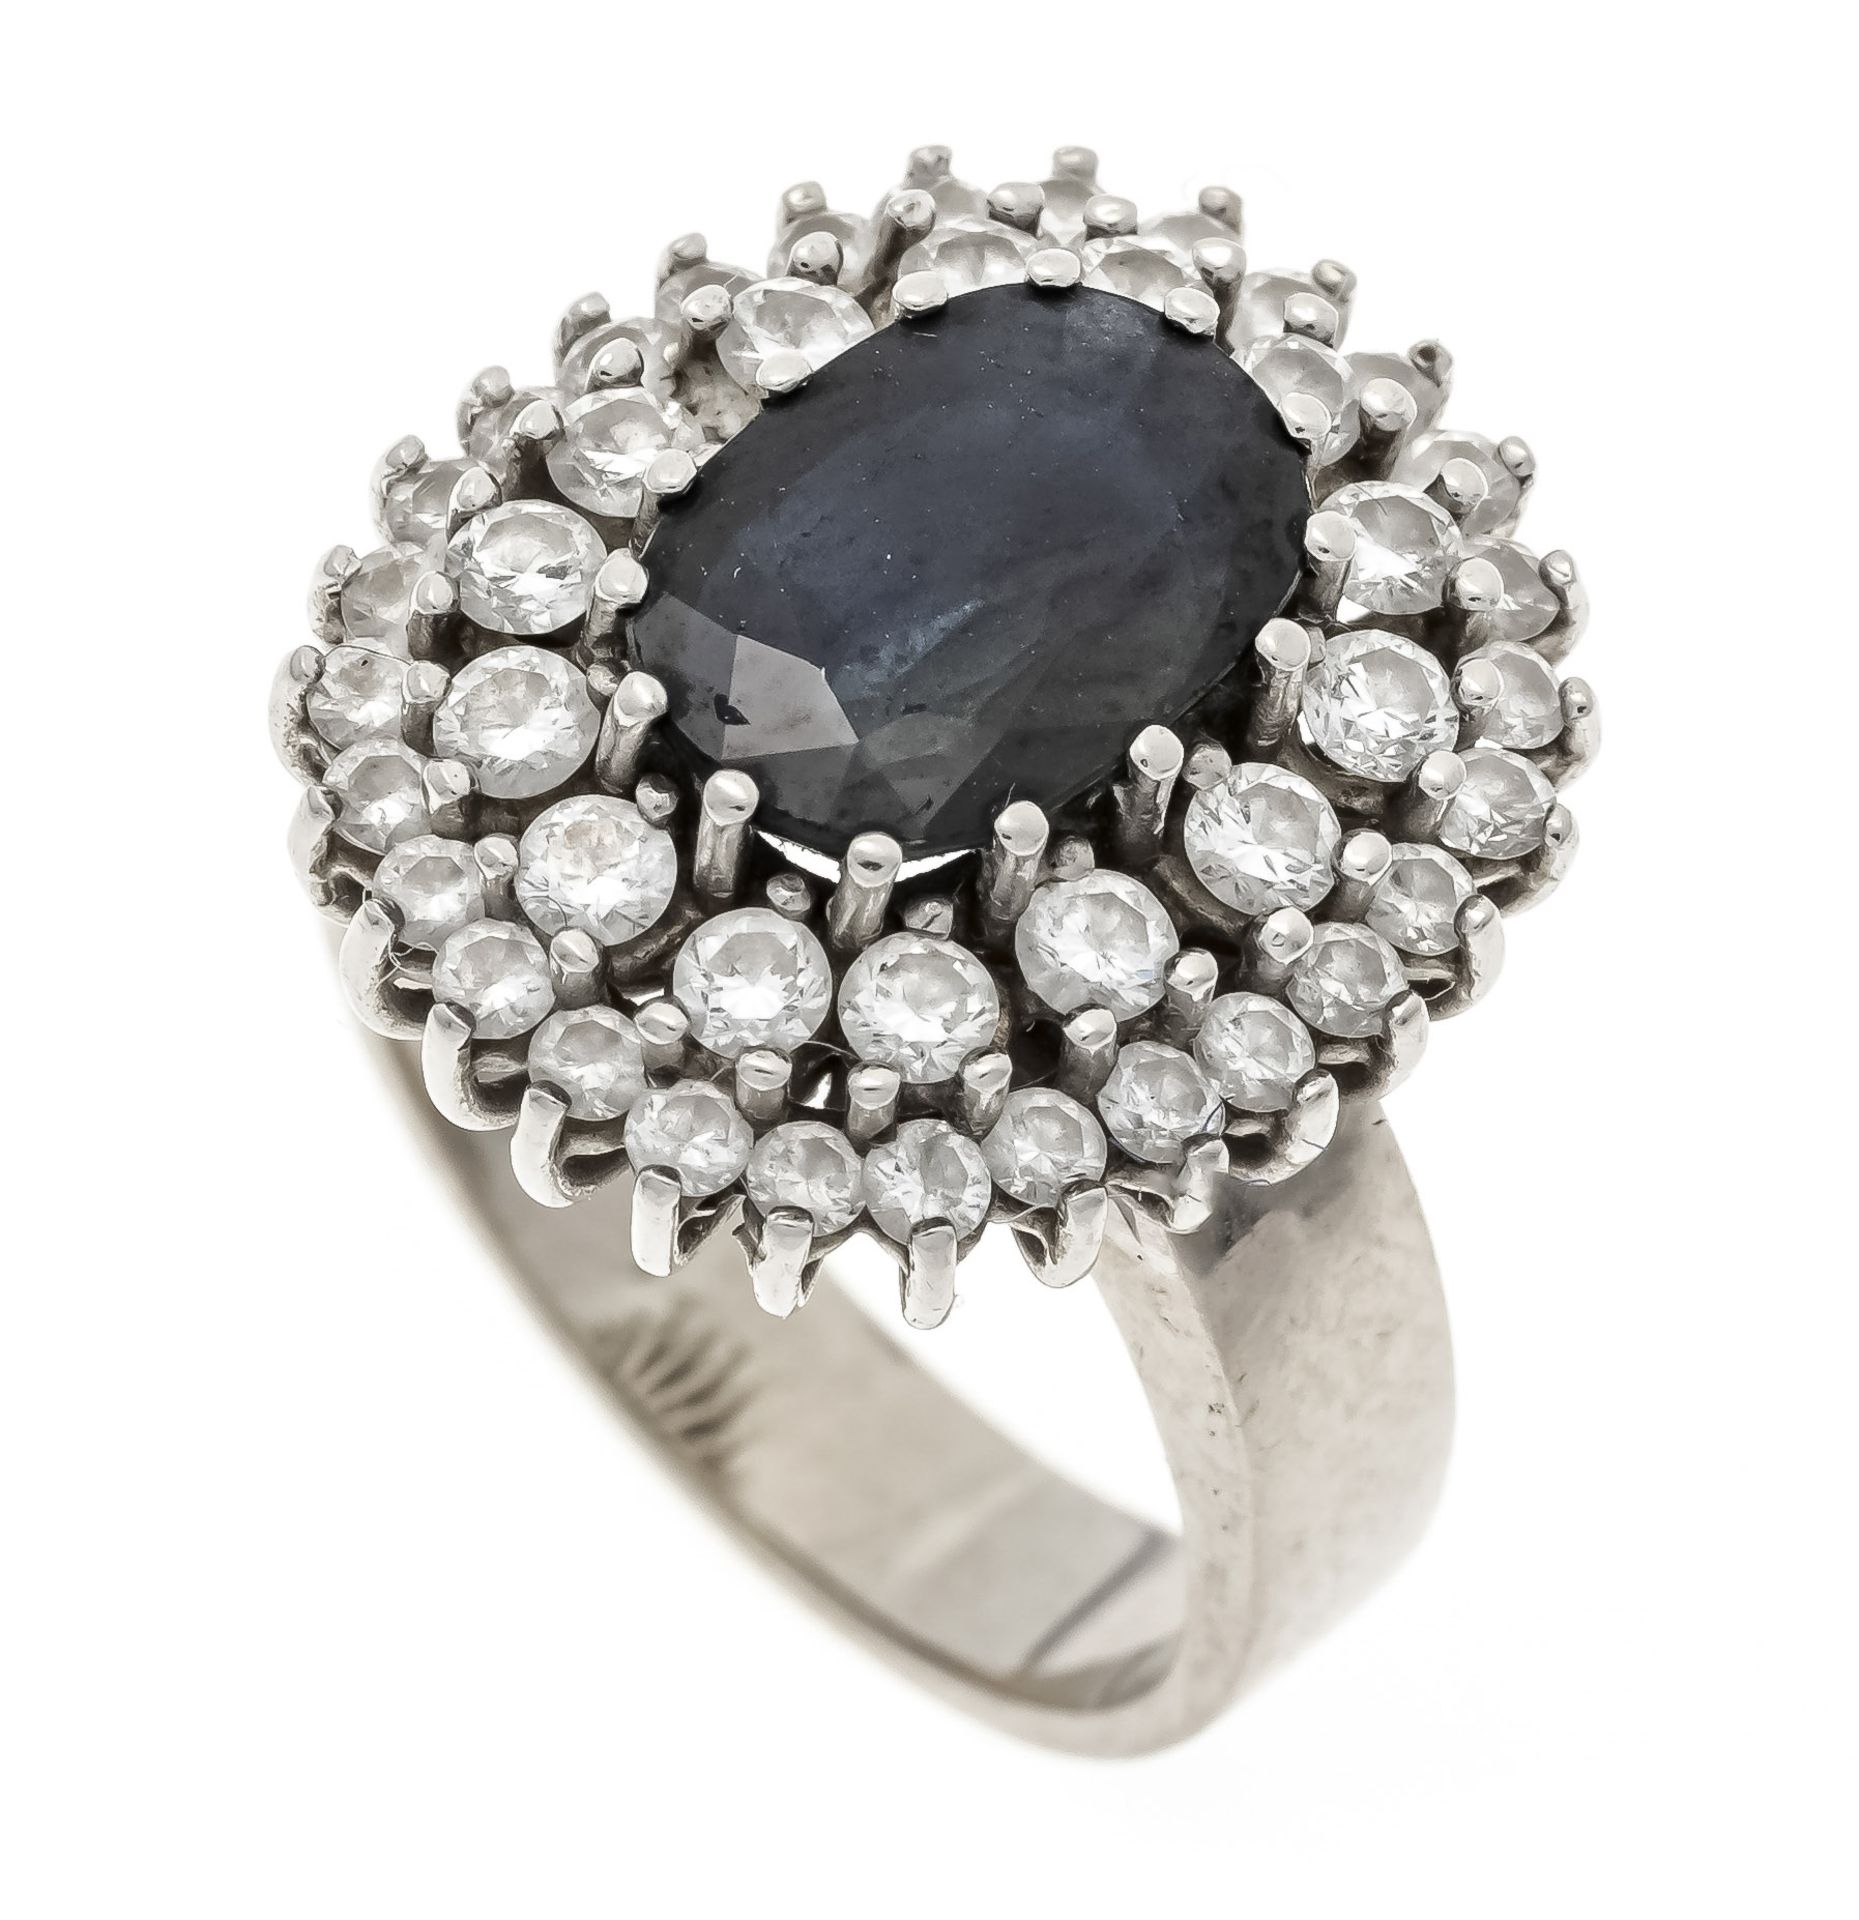 A sapphire and brilliant-cut diamond ring, WG 585/000, with an oval faceted sapphire 1.96 ct dark